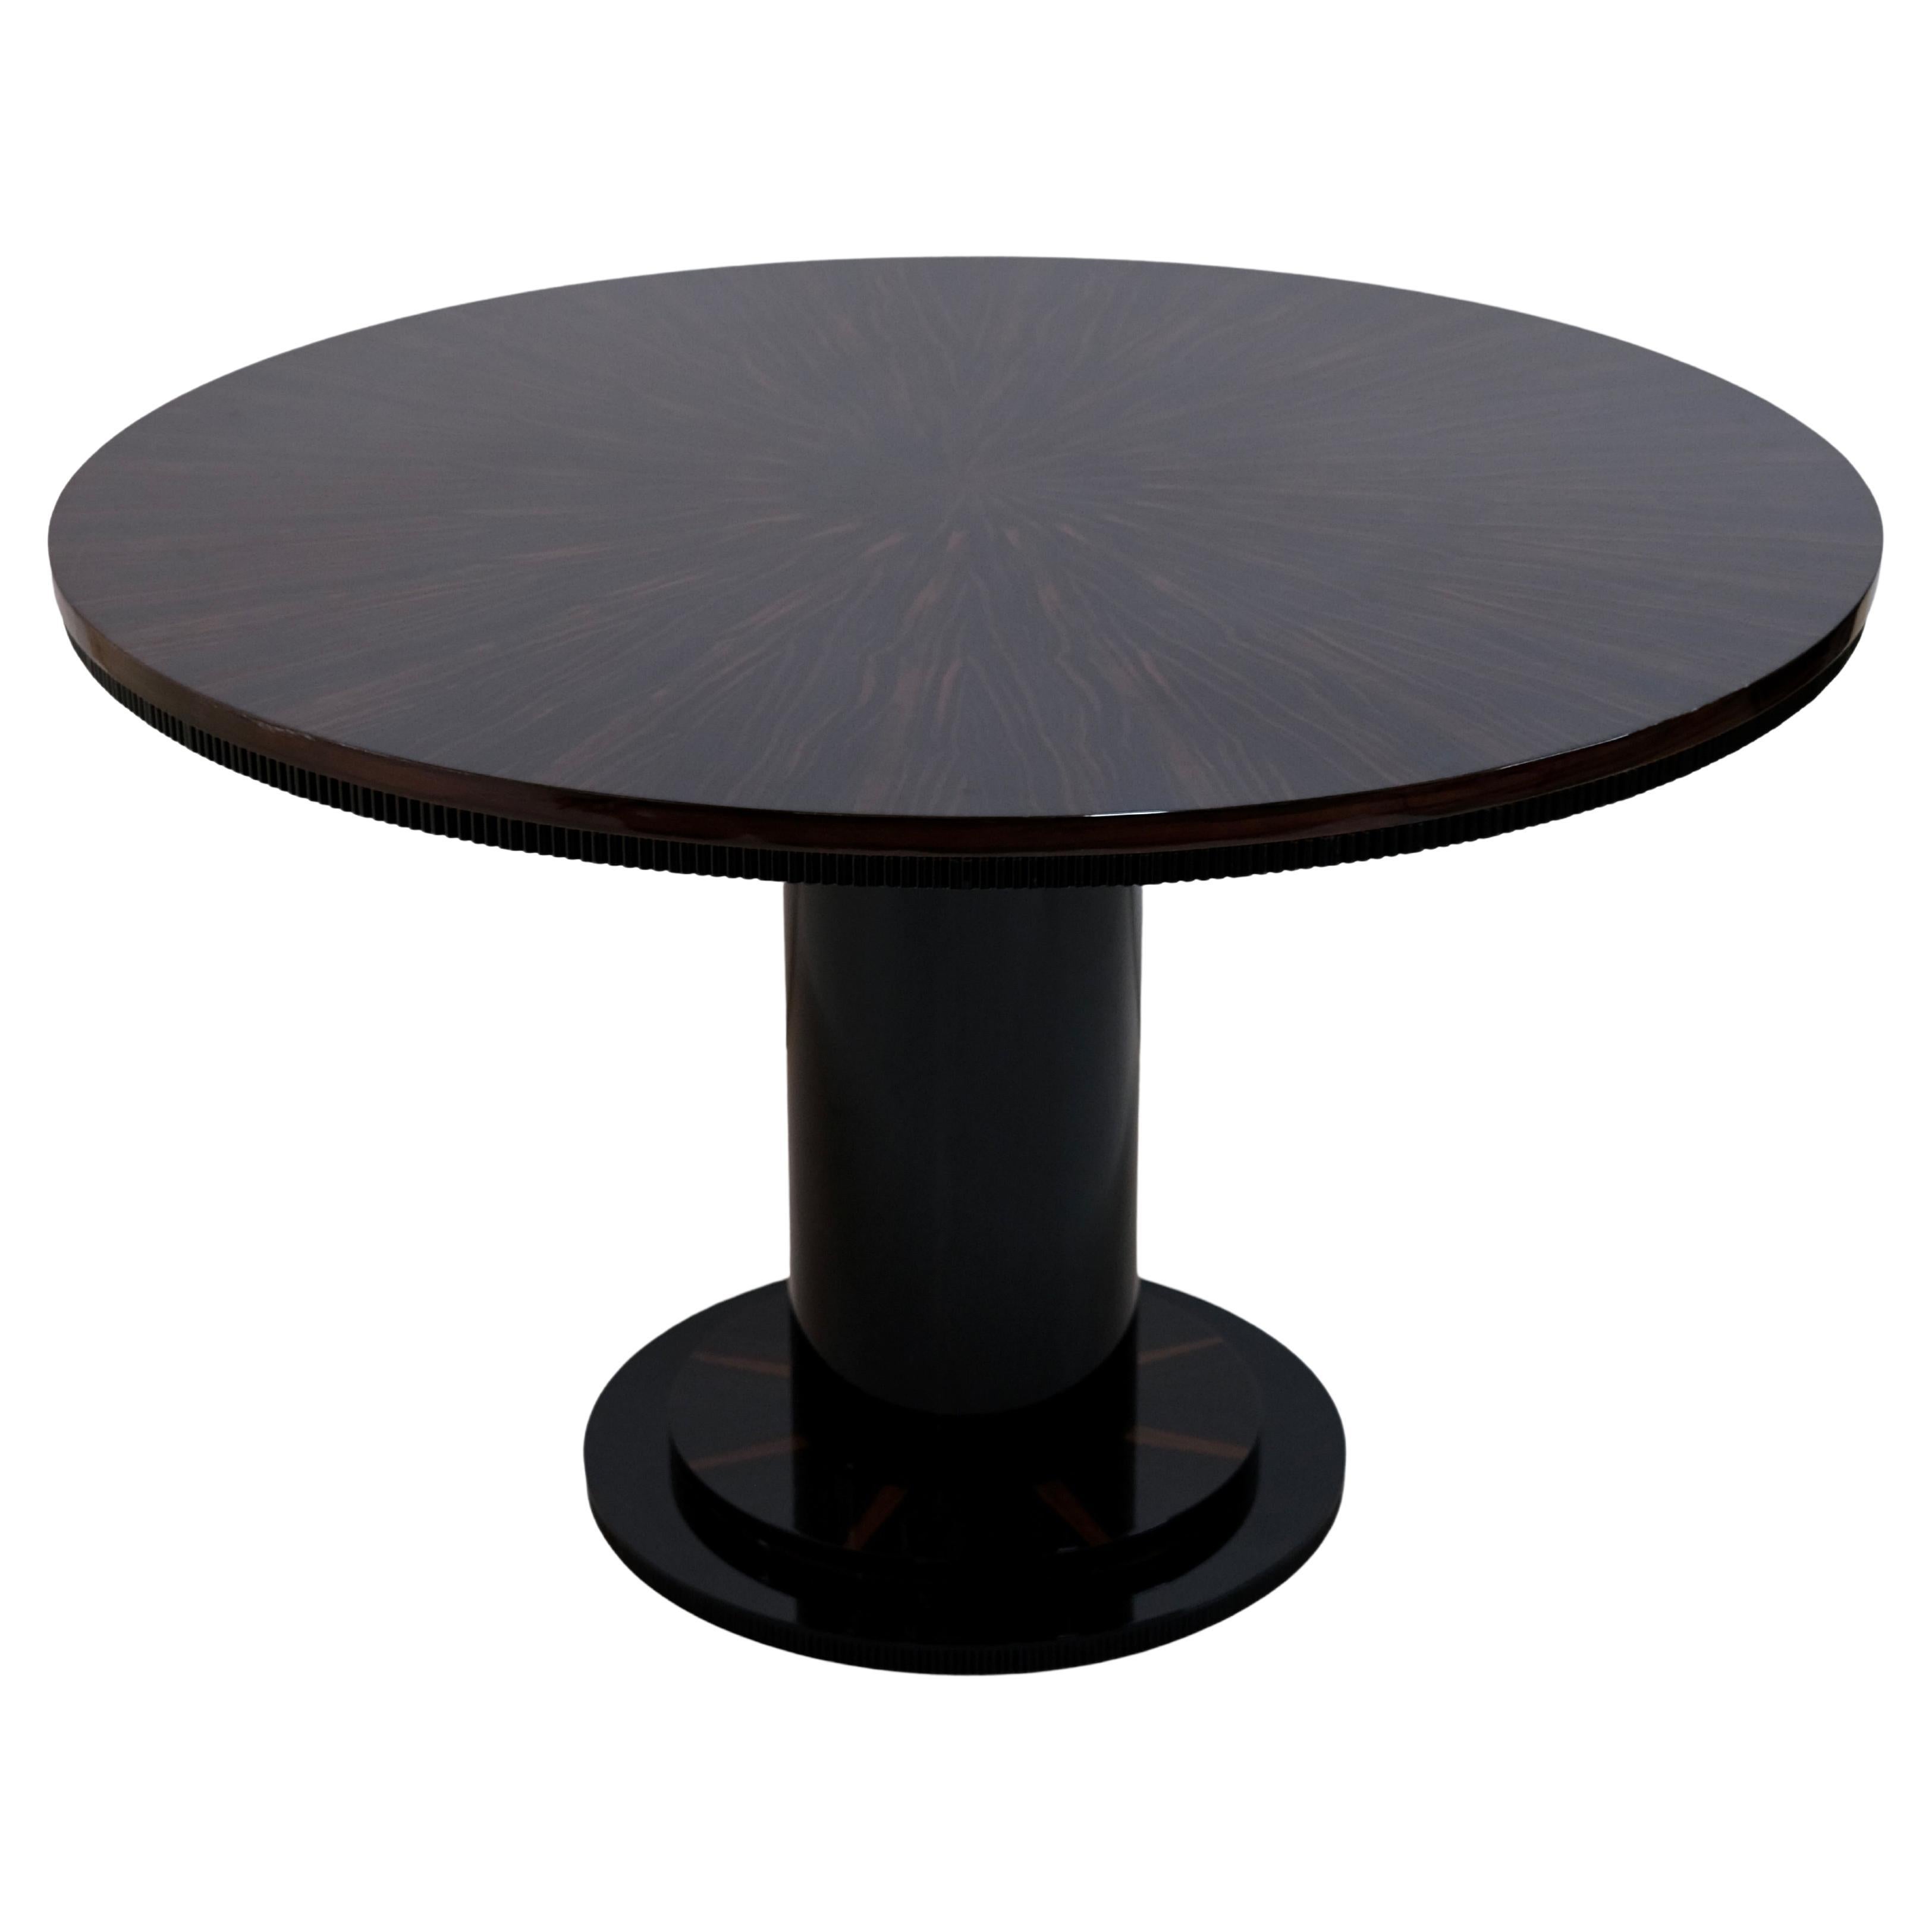 Round Art Deco Style Dining or Center Table in Real Wood Veneer For Sale